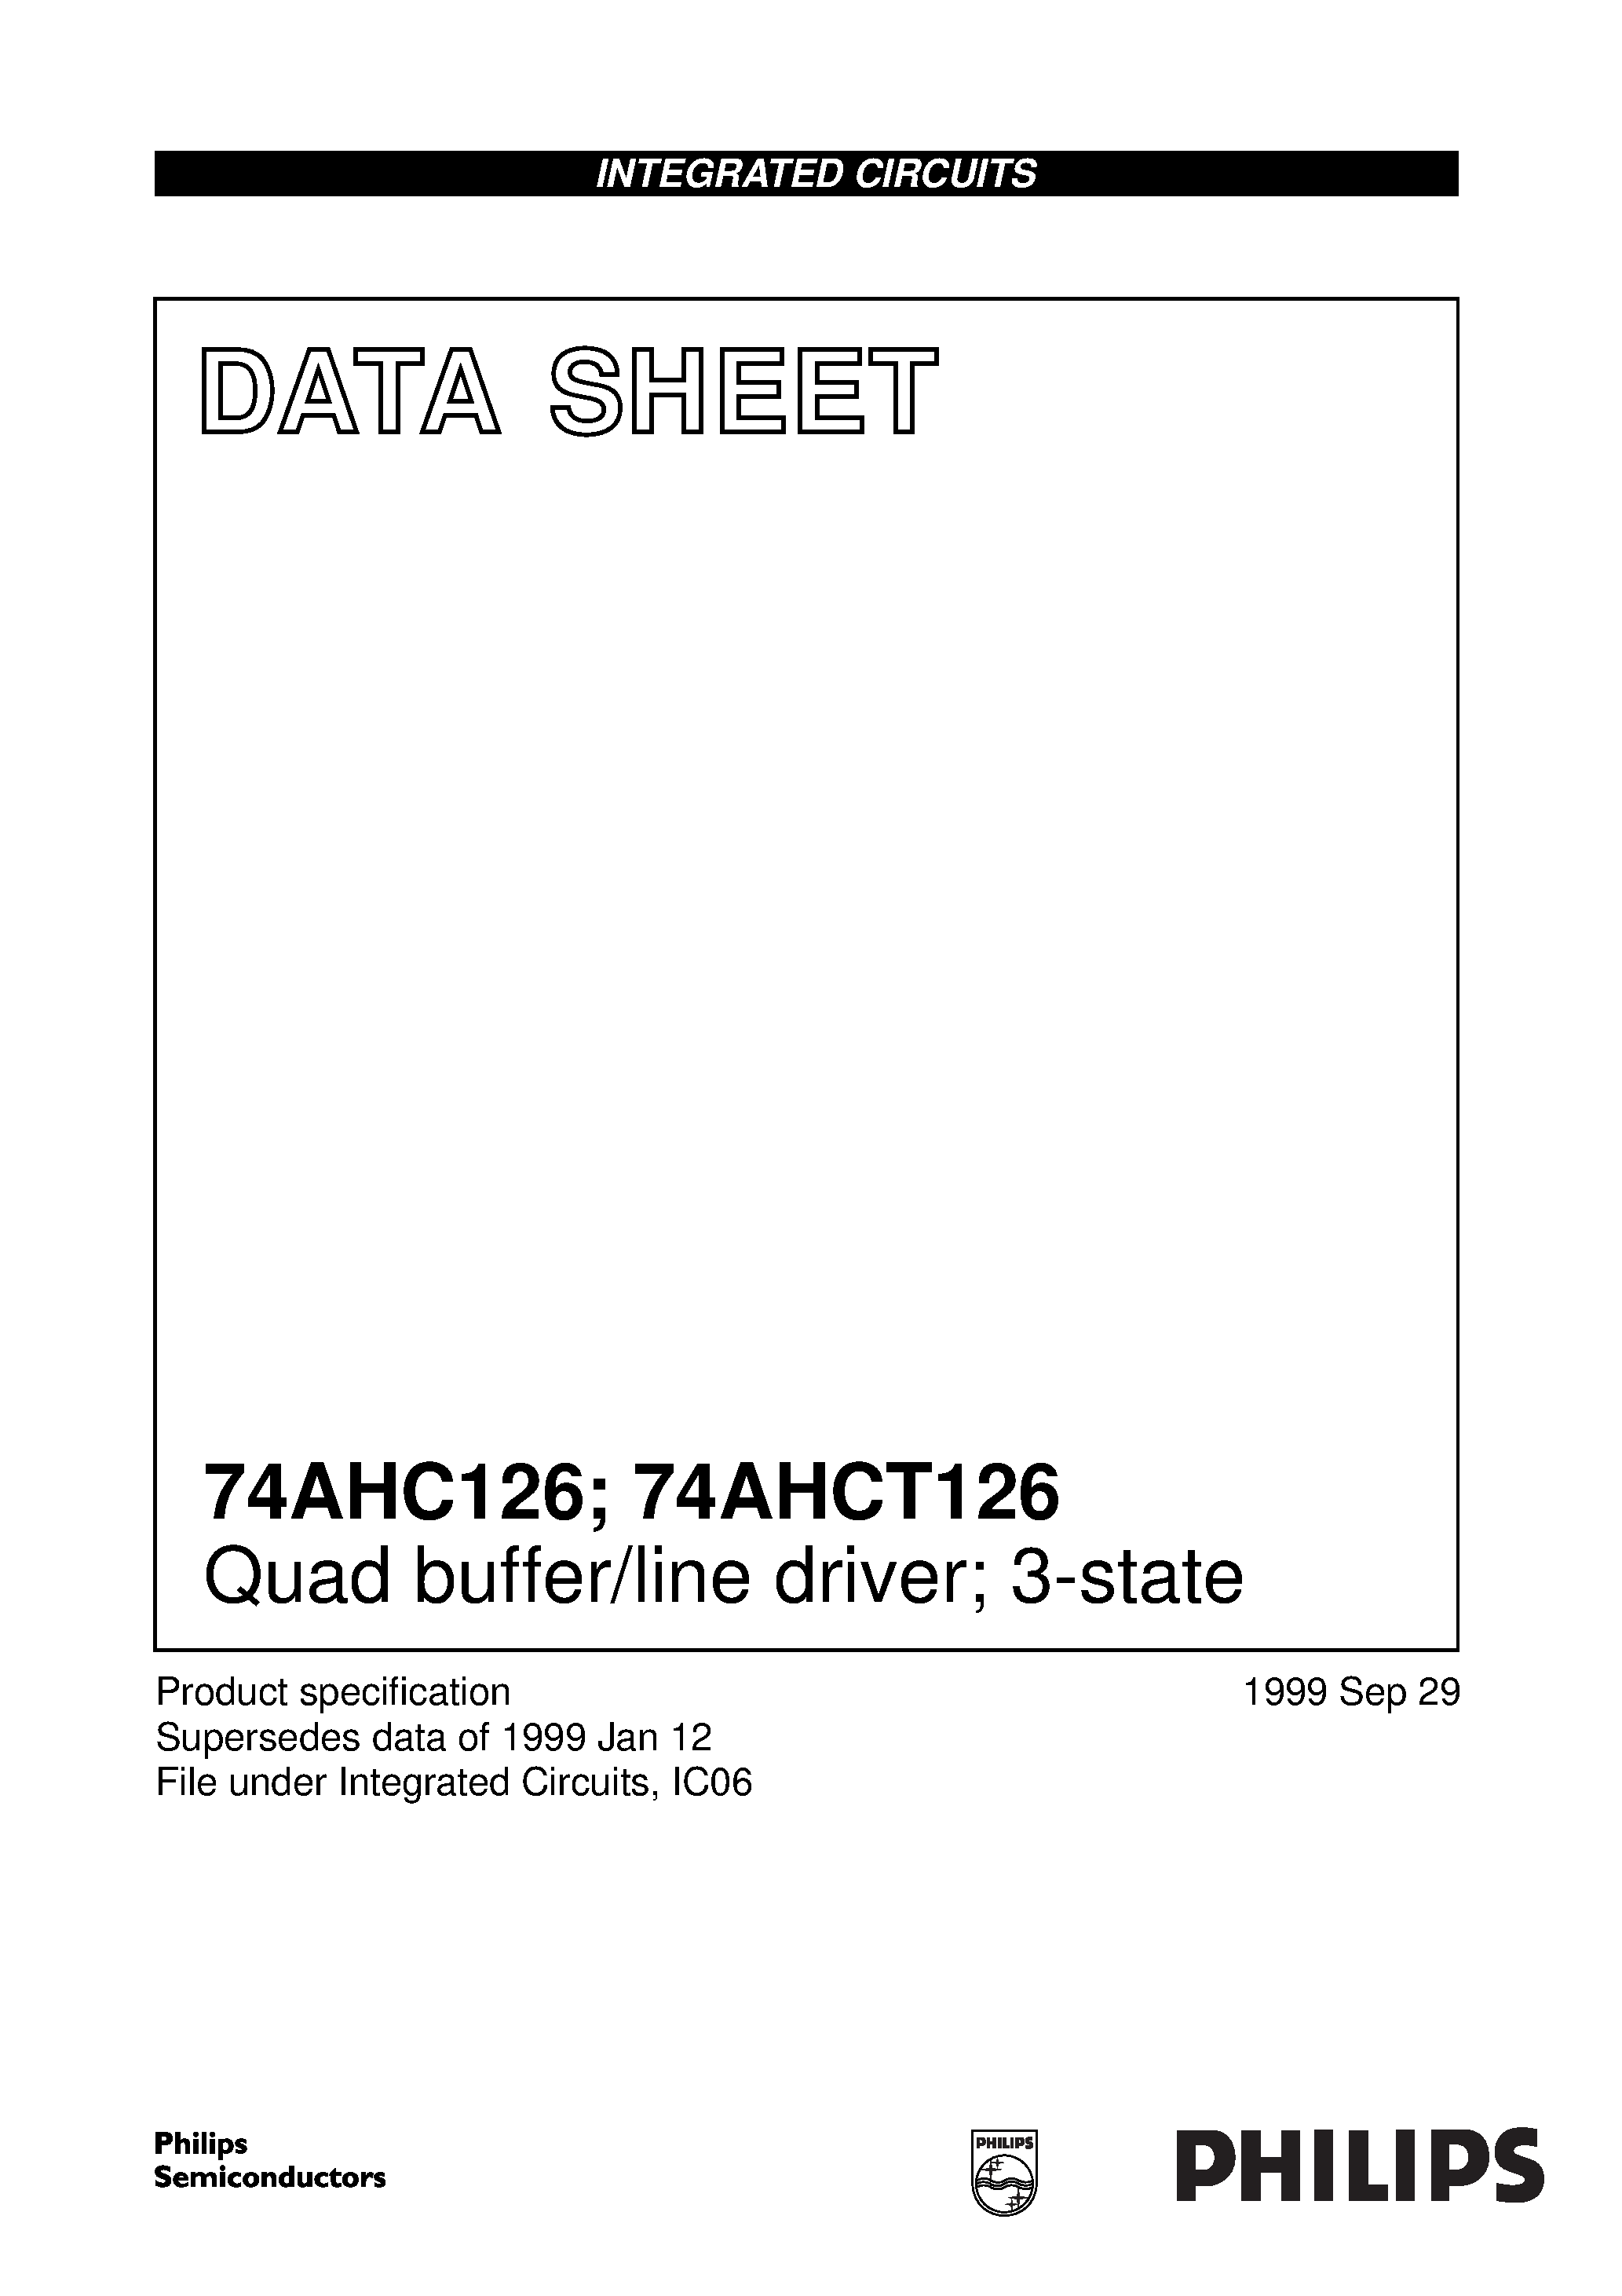 Datasheet 74AHC126 - Quad buffer/line driver; 3-state page 1